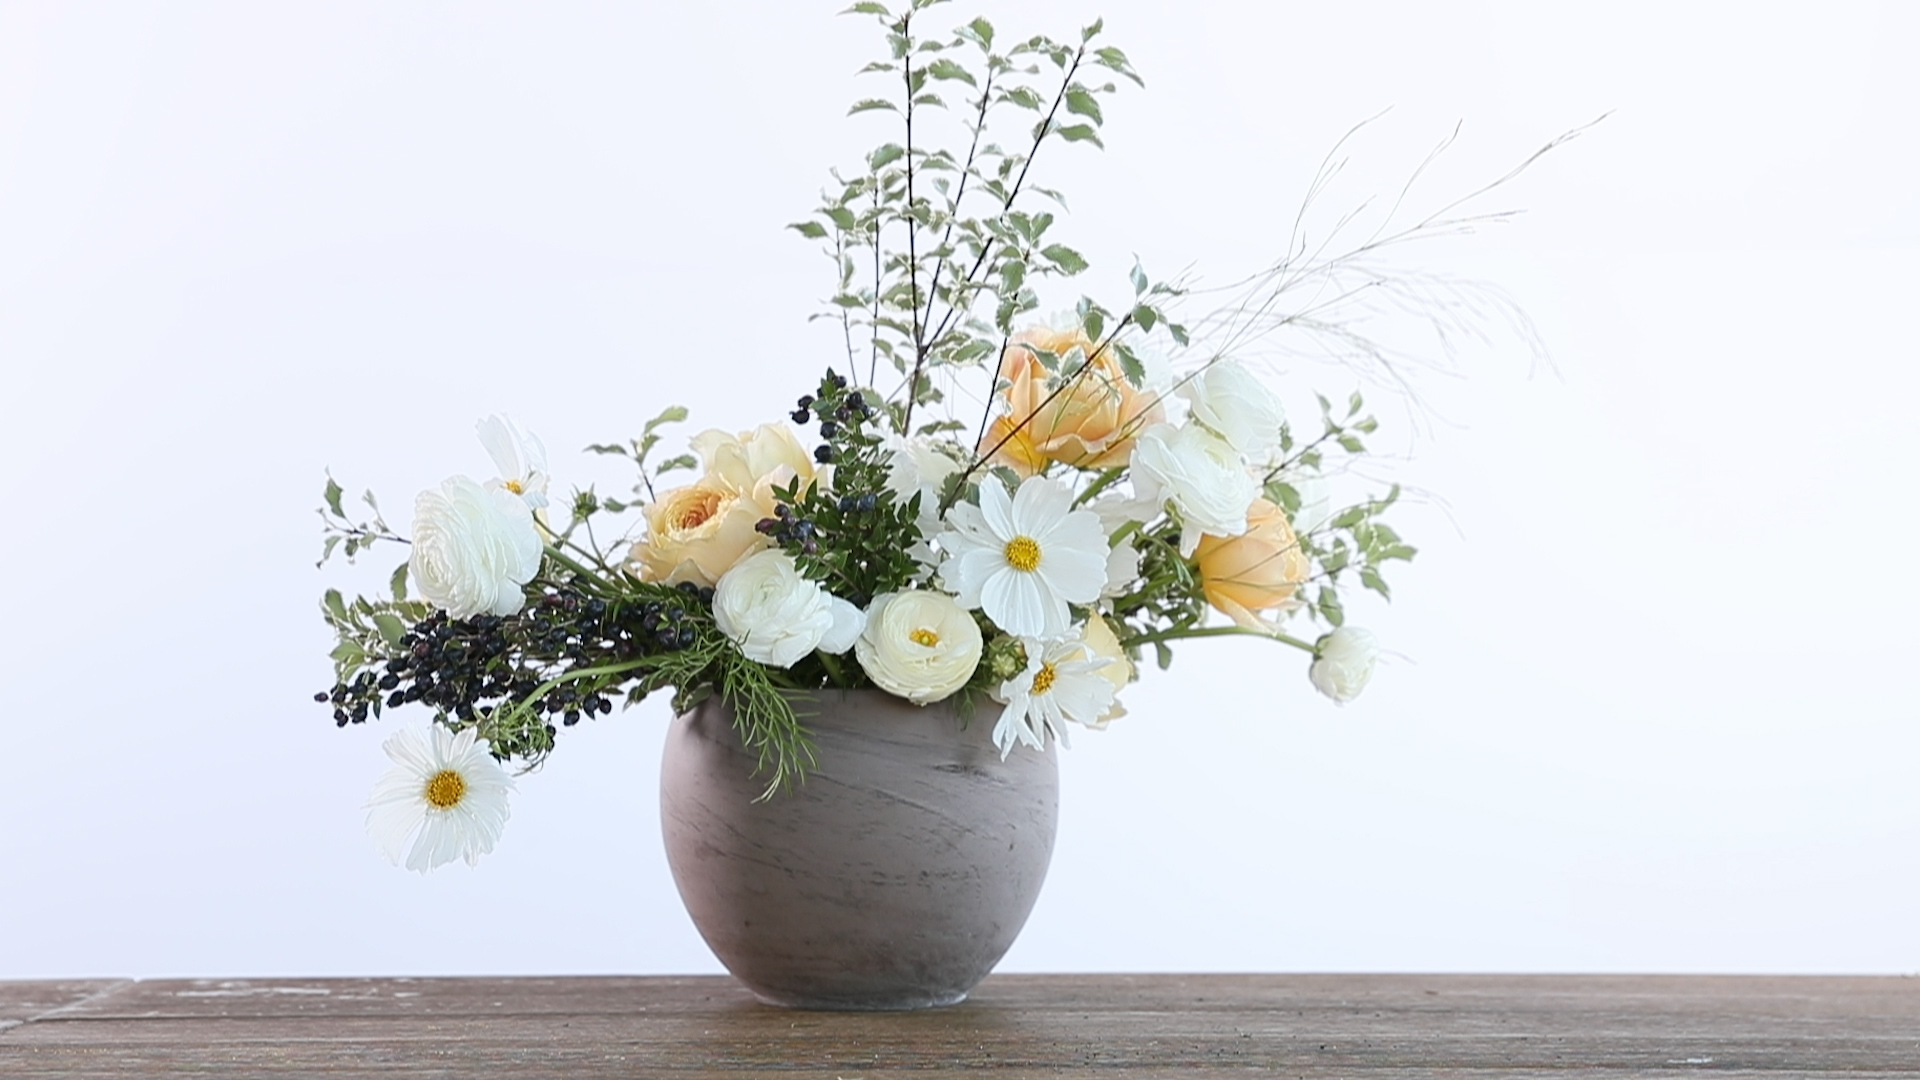 How to Arrange Flowers in a Wide-Mouthed Vase